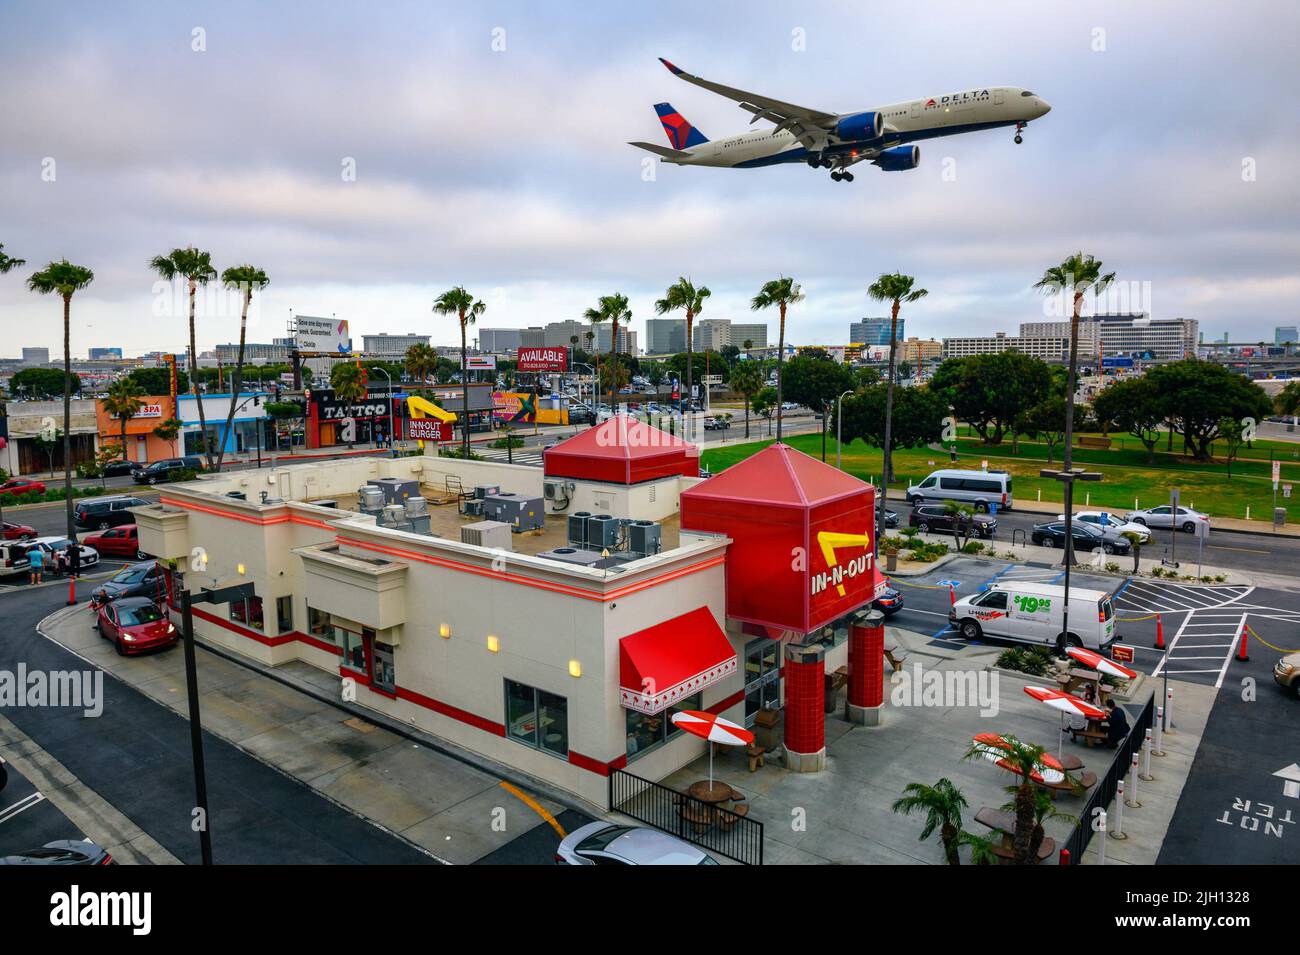 Delta Airlines plane flies above In-N-Out Burger restaurant while landing at the Los Angeles International Airport LAX Stock Photo